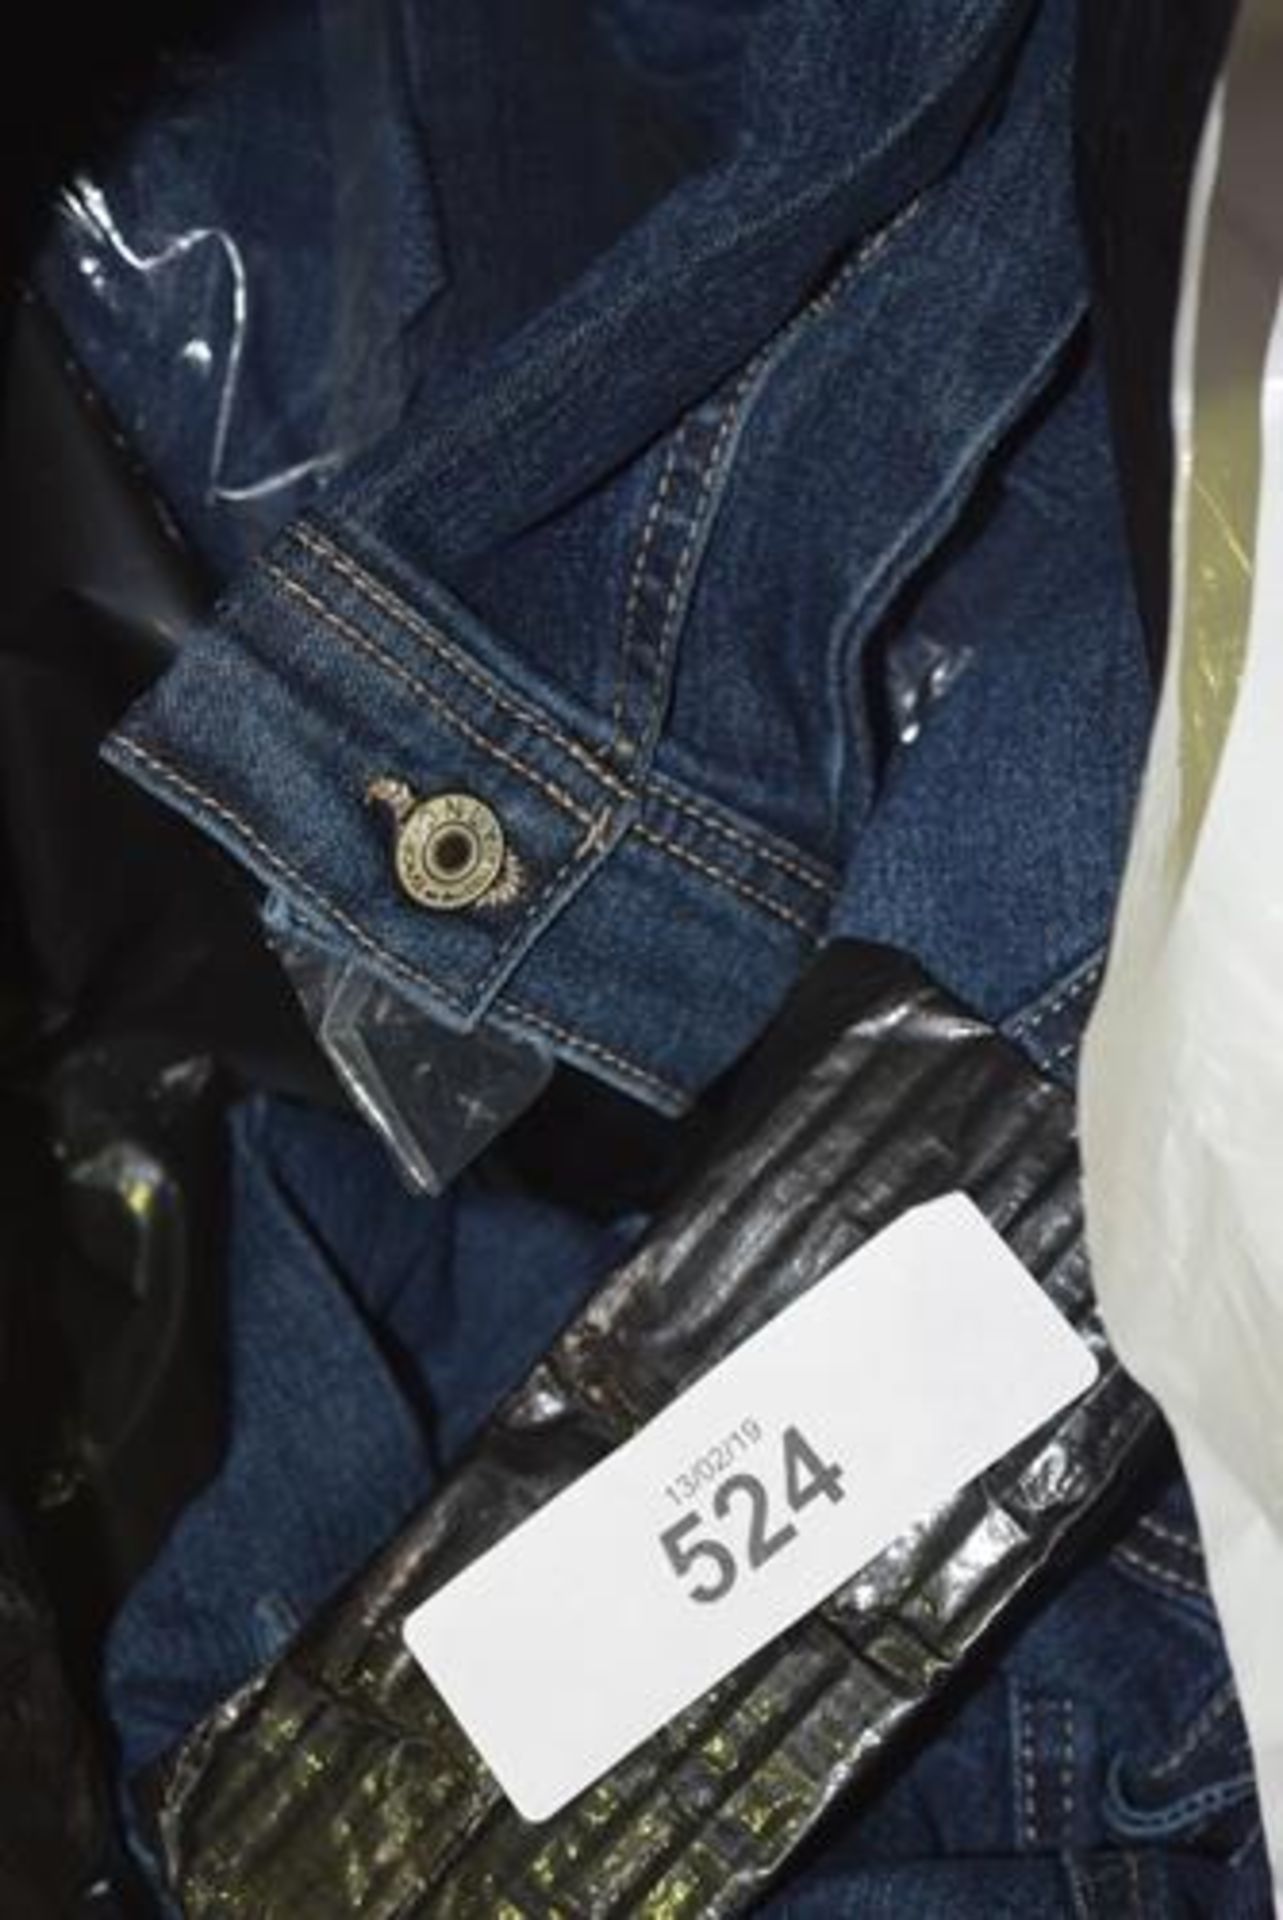 Qty of Only denim jackets, RRP £35 each - new (CB21)